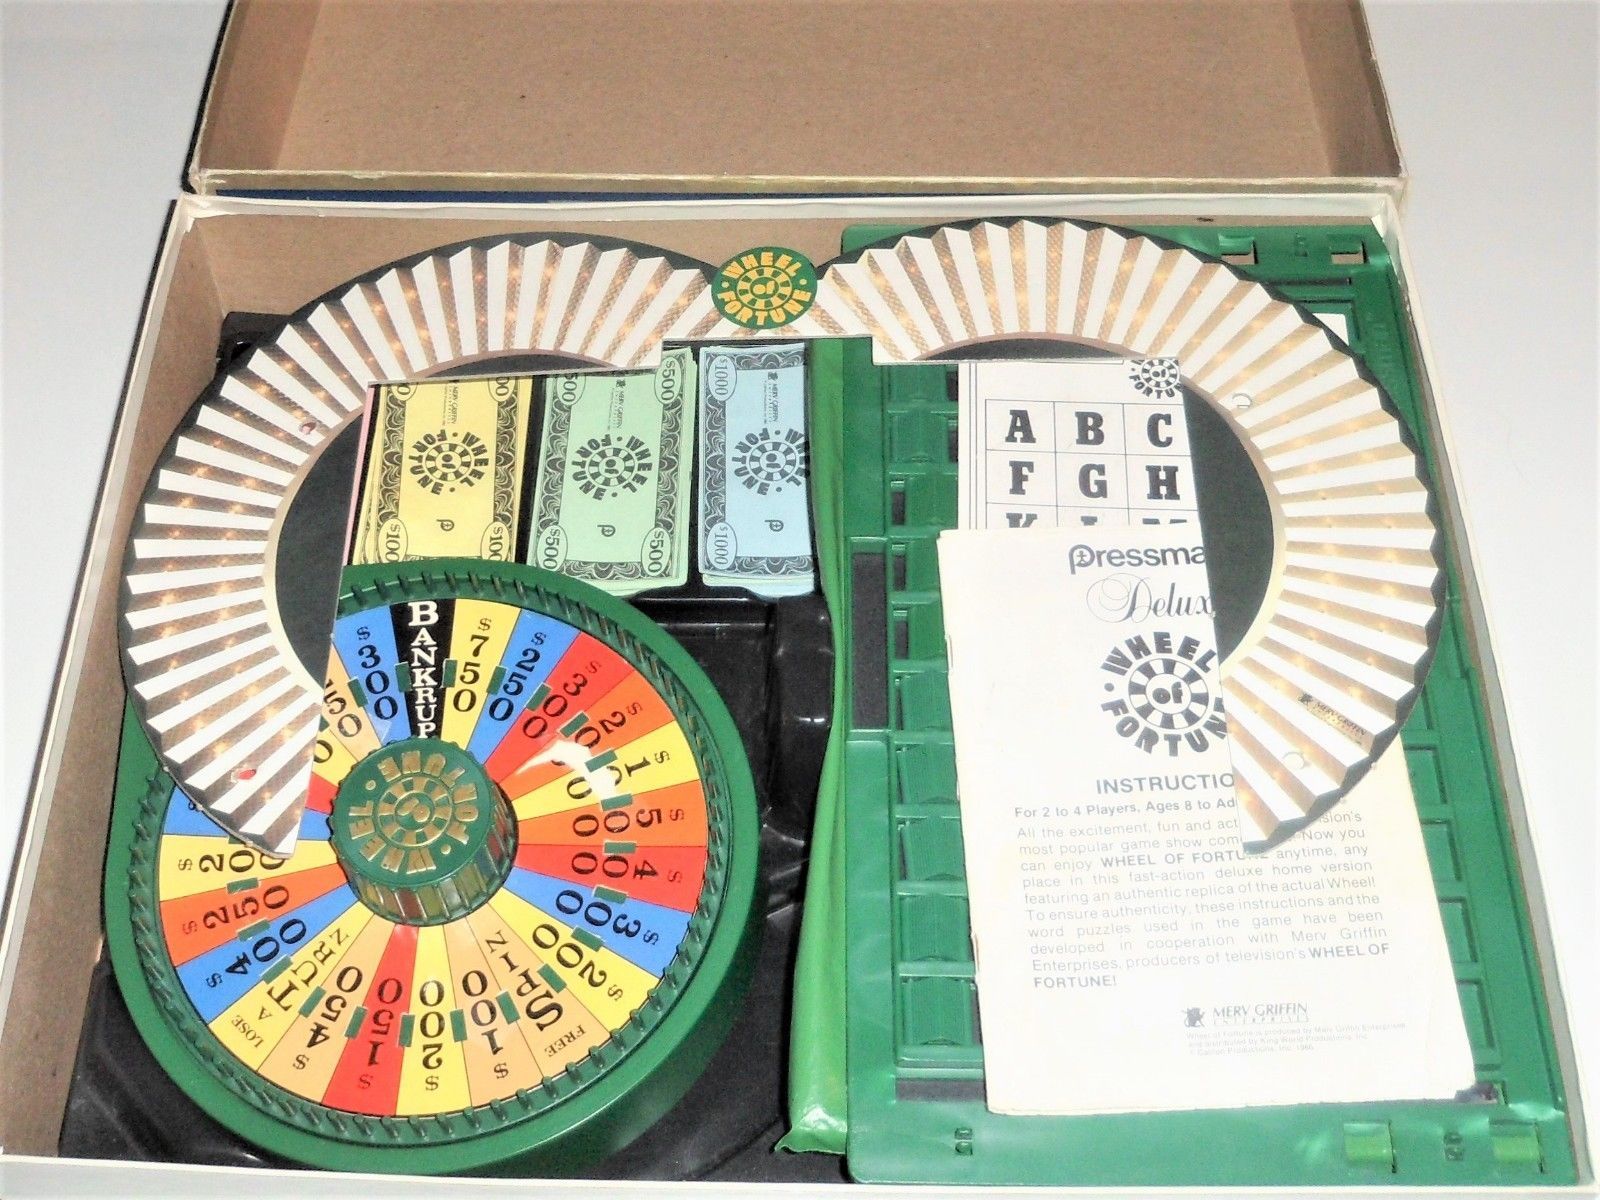 wheel of fortune deluxe edition board game